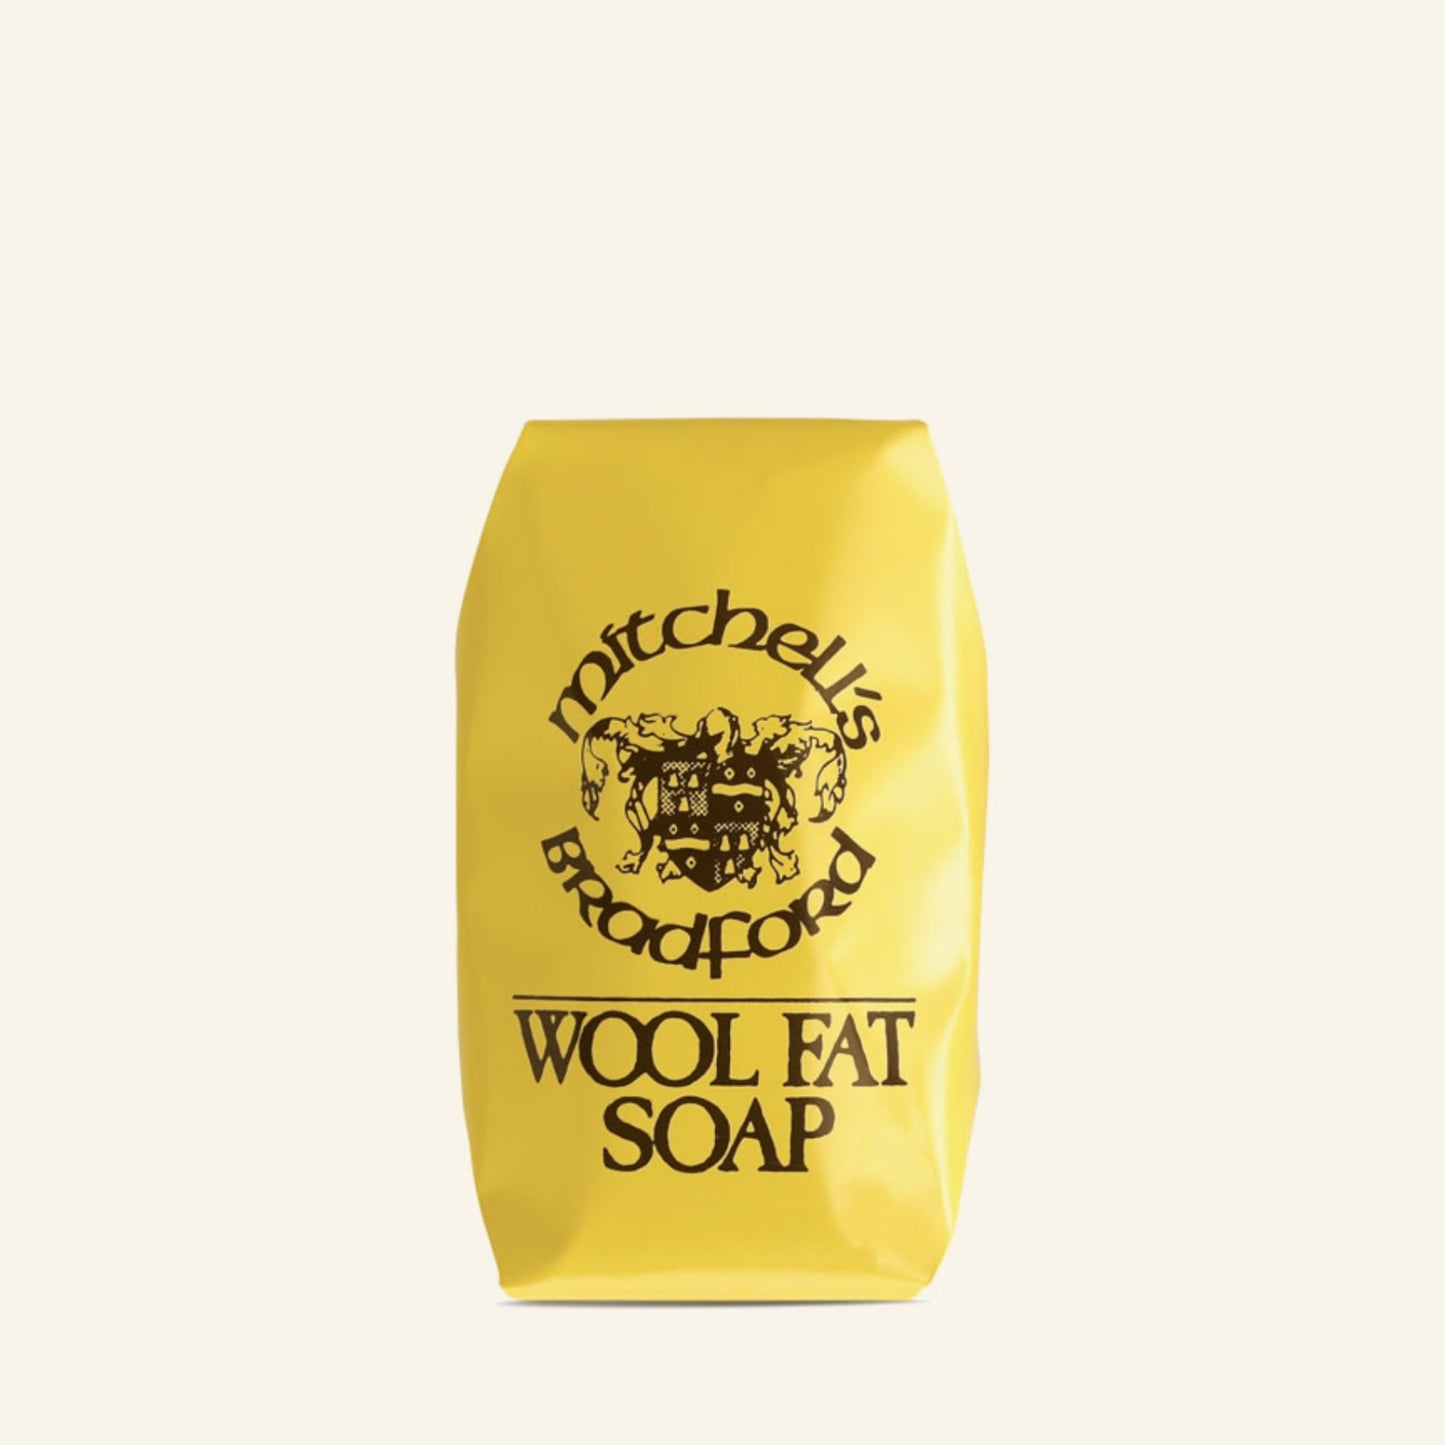 Original Wool Fat Soap - The Great Yorkshire Shop